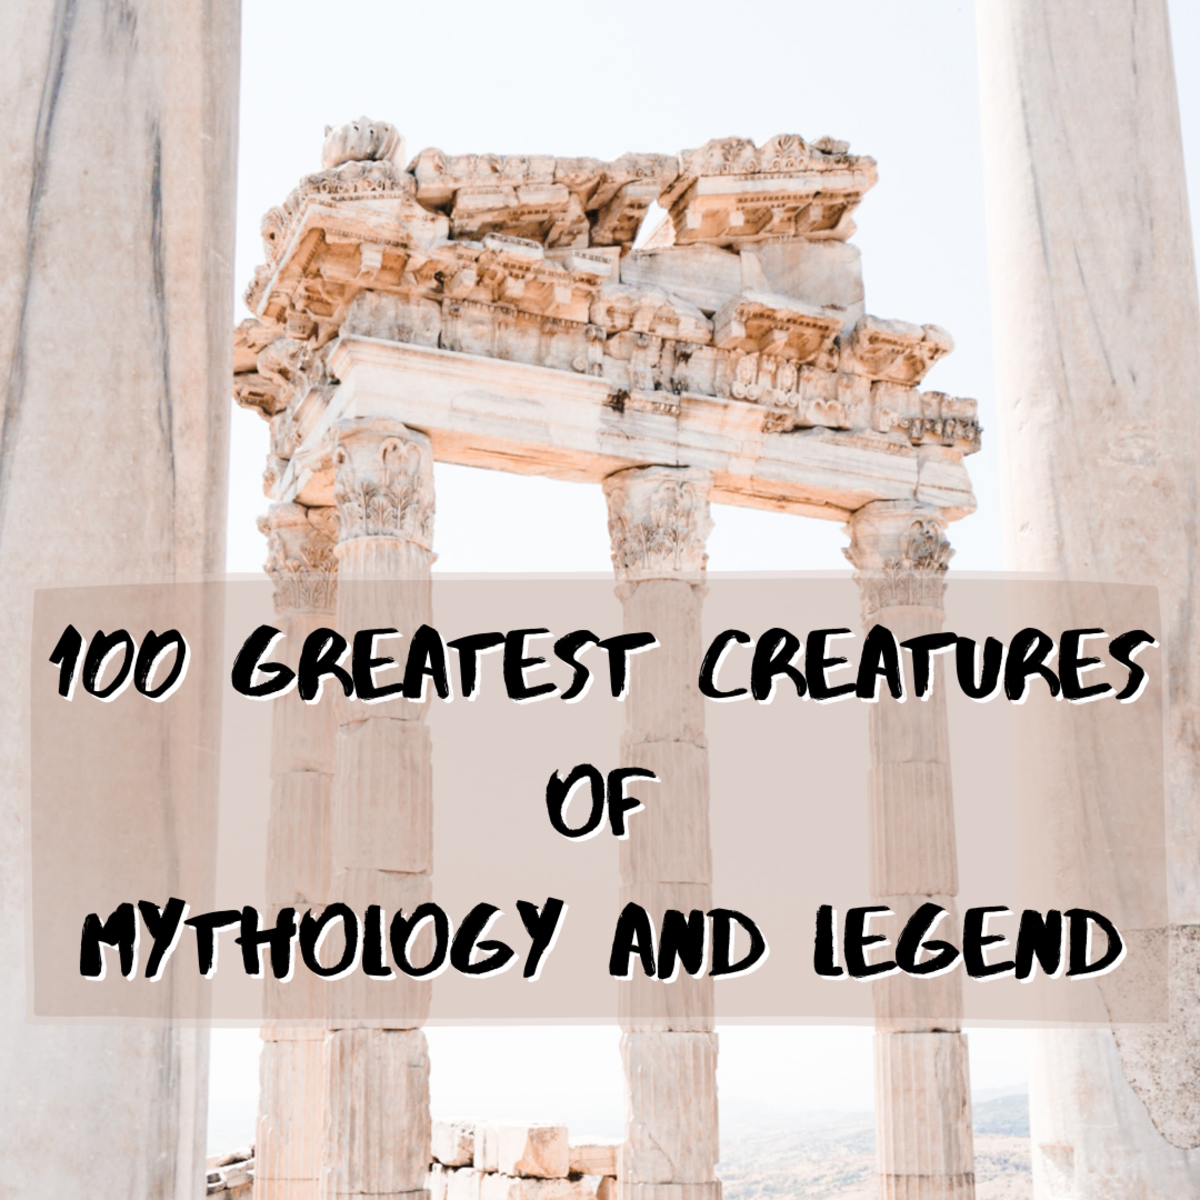 This article presents an epic list of the 100 greatest beasts and beings of mythology, legend and folklore. You'll learn about the potential origins and debated existence of mythical creatures.